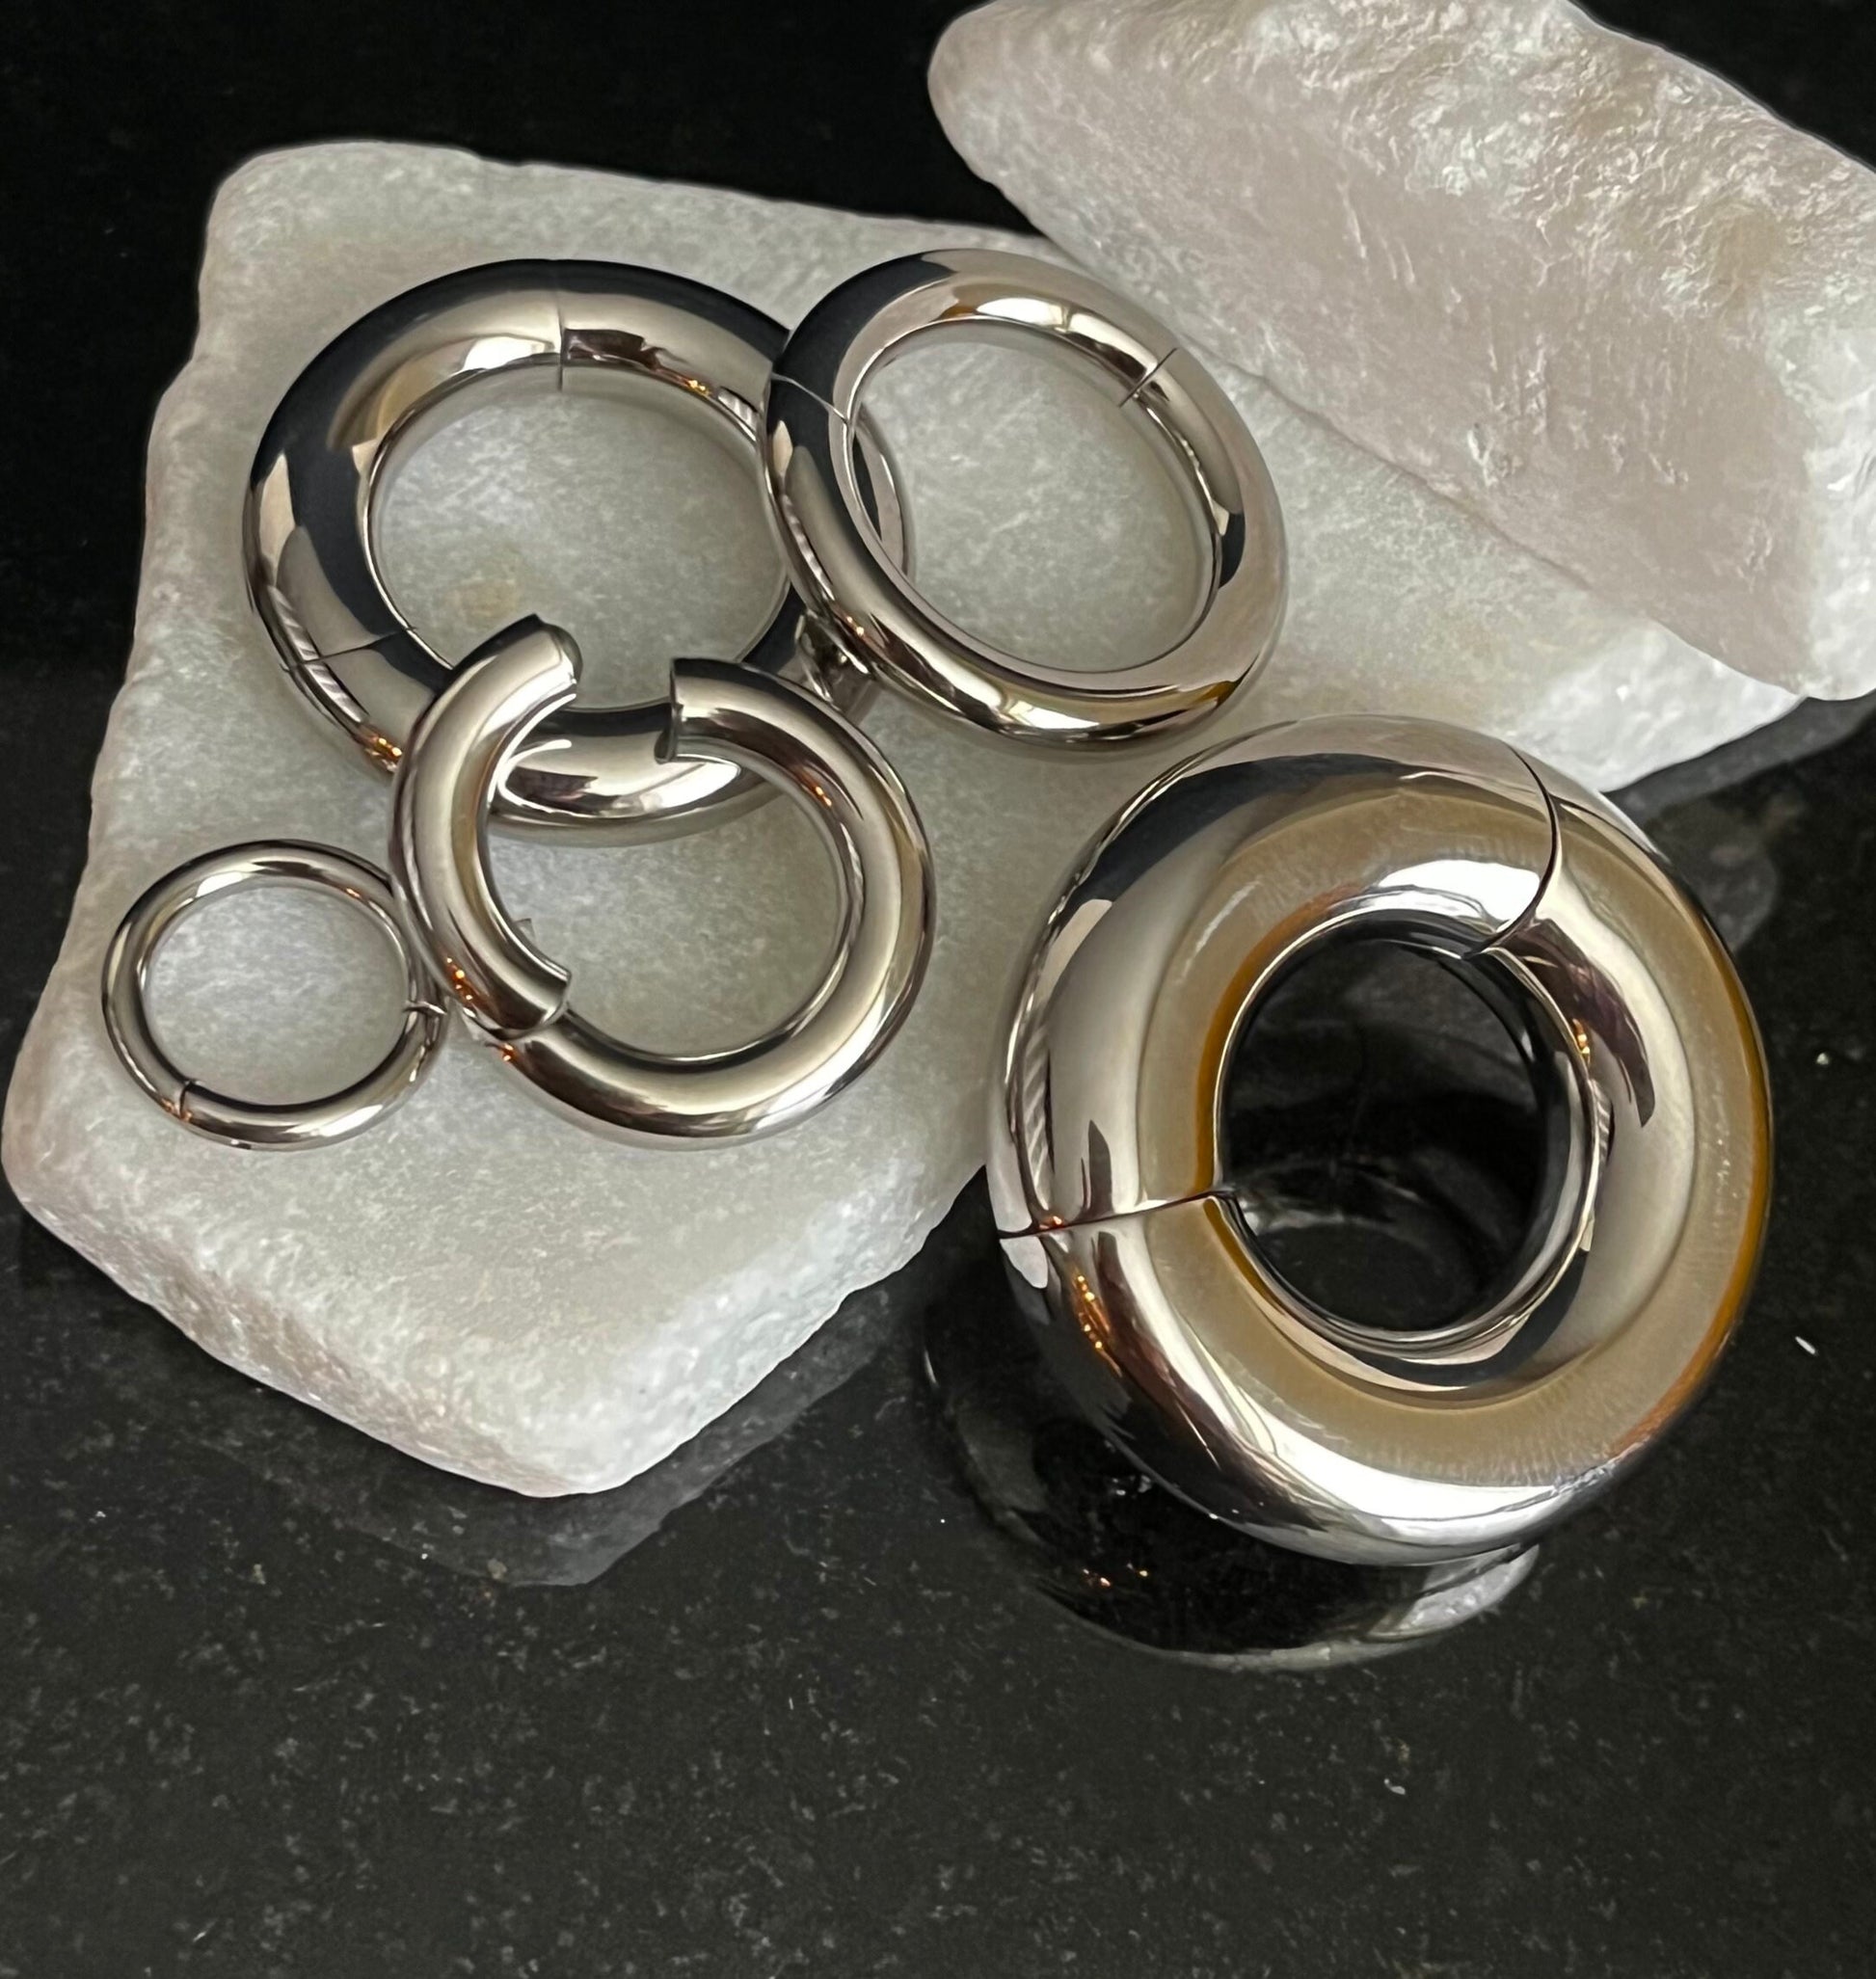 1 Piece Large Gauge IMPLANT GRADE TITANIUM Hinged Segment Ring/Hoop - Easy and Secure Clickers - Gauges 12g (2mm) thru 2g (6mm) Available!